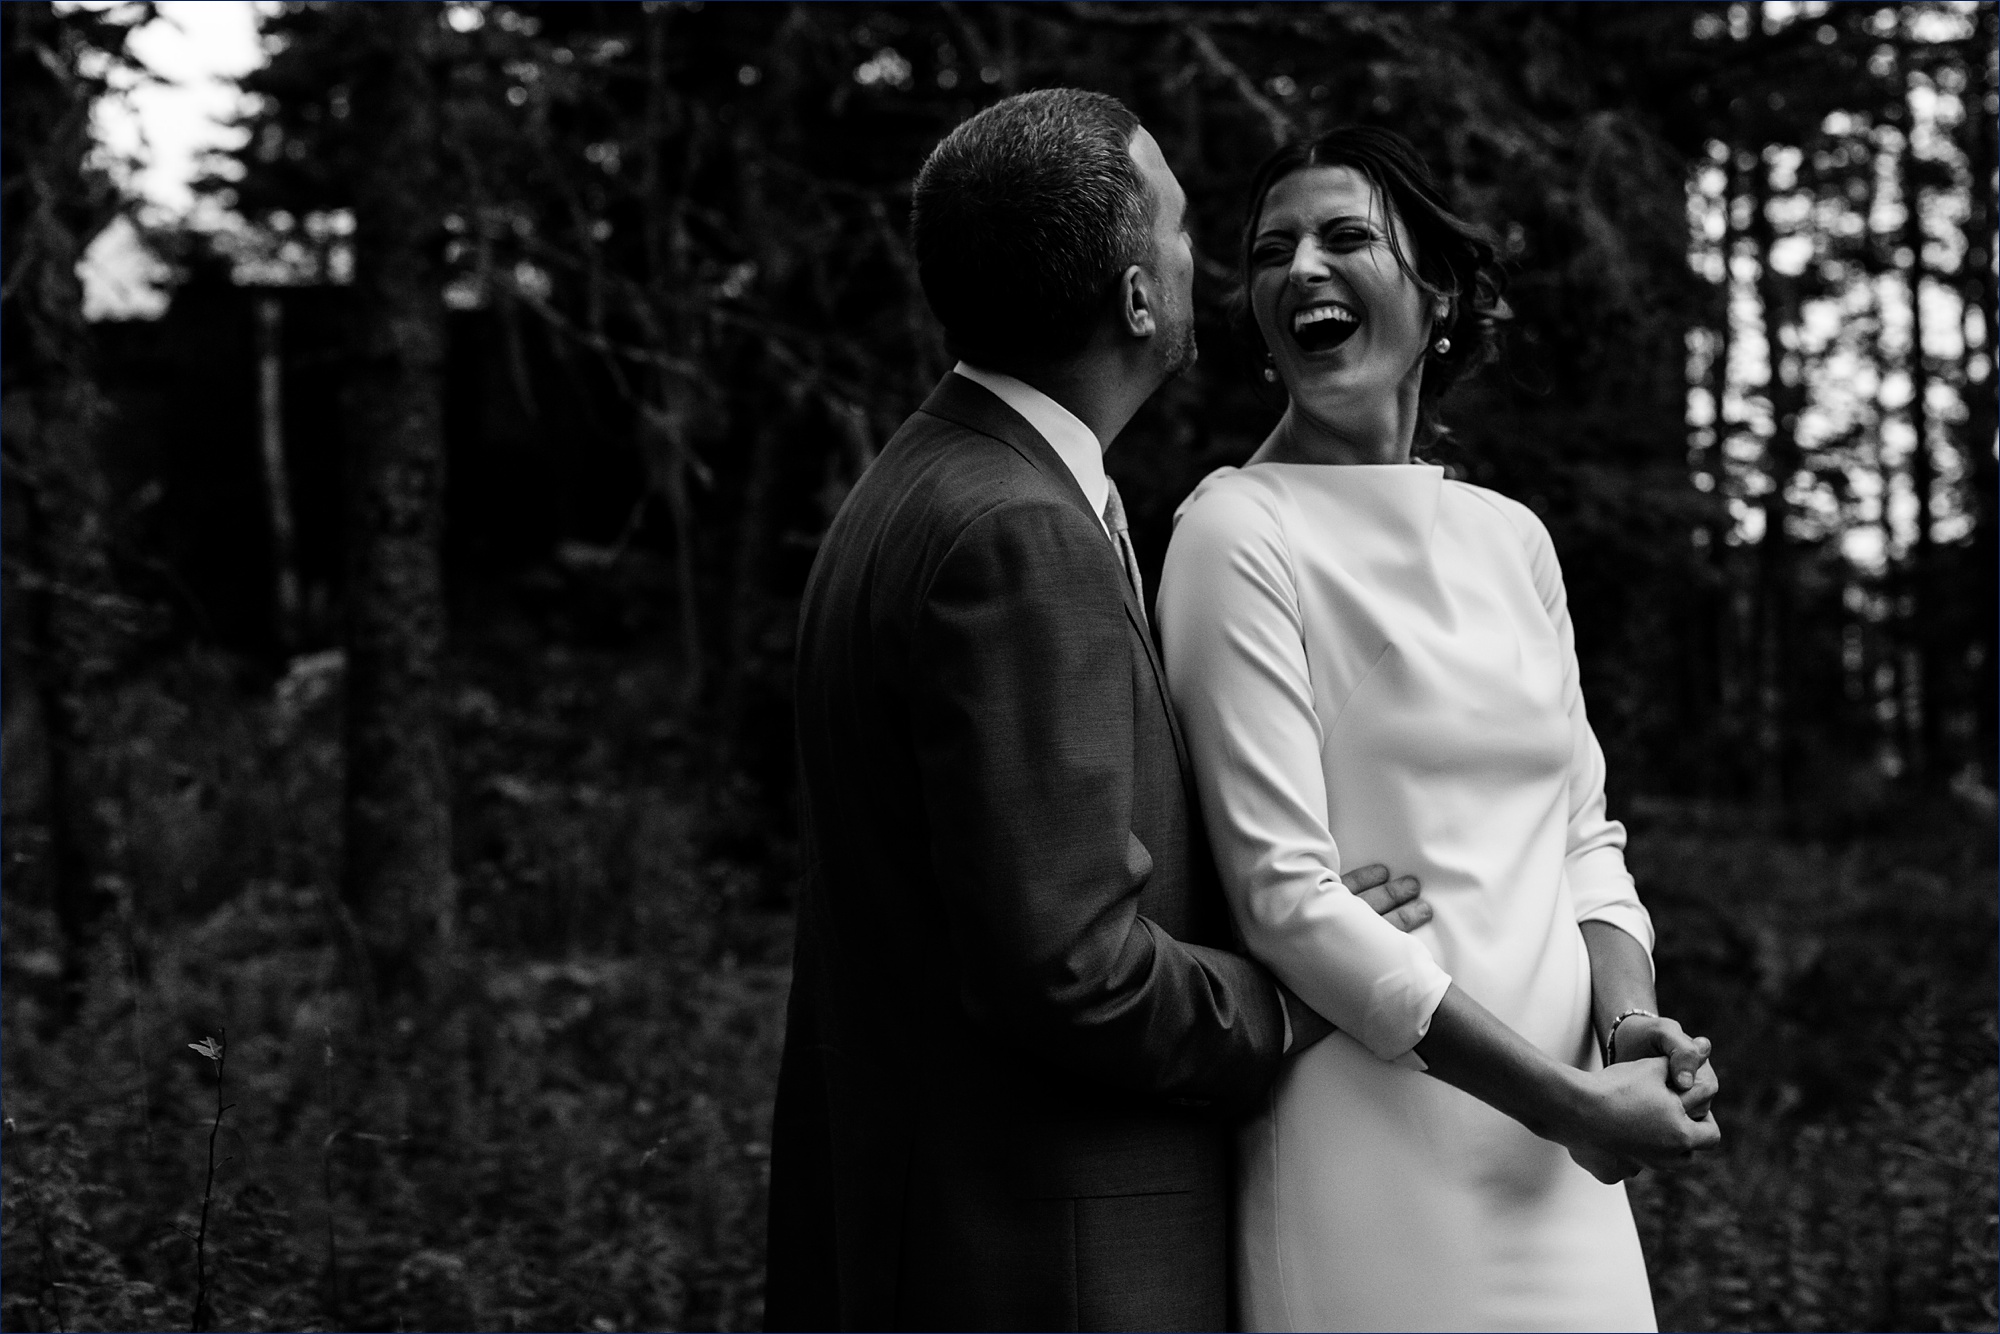 The bride and groom laugh together in the woods of Little Cranberry Island Maine